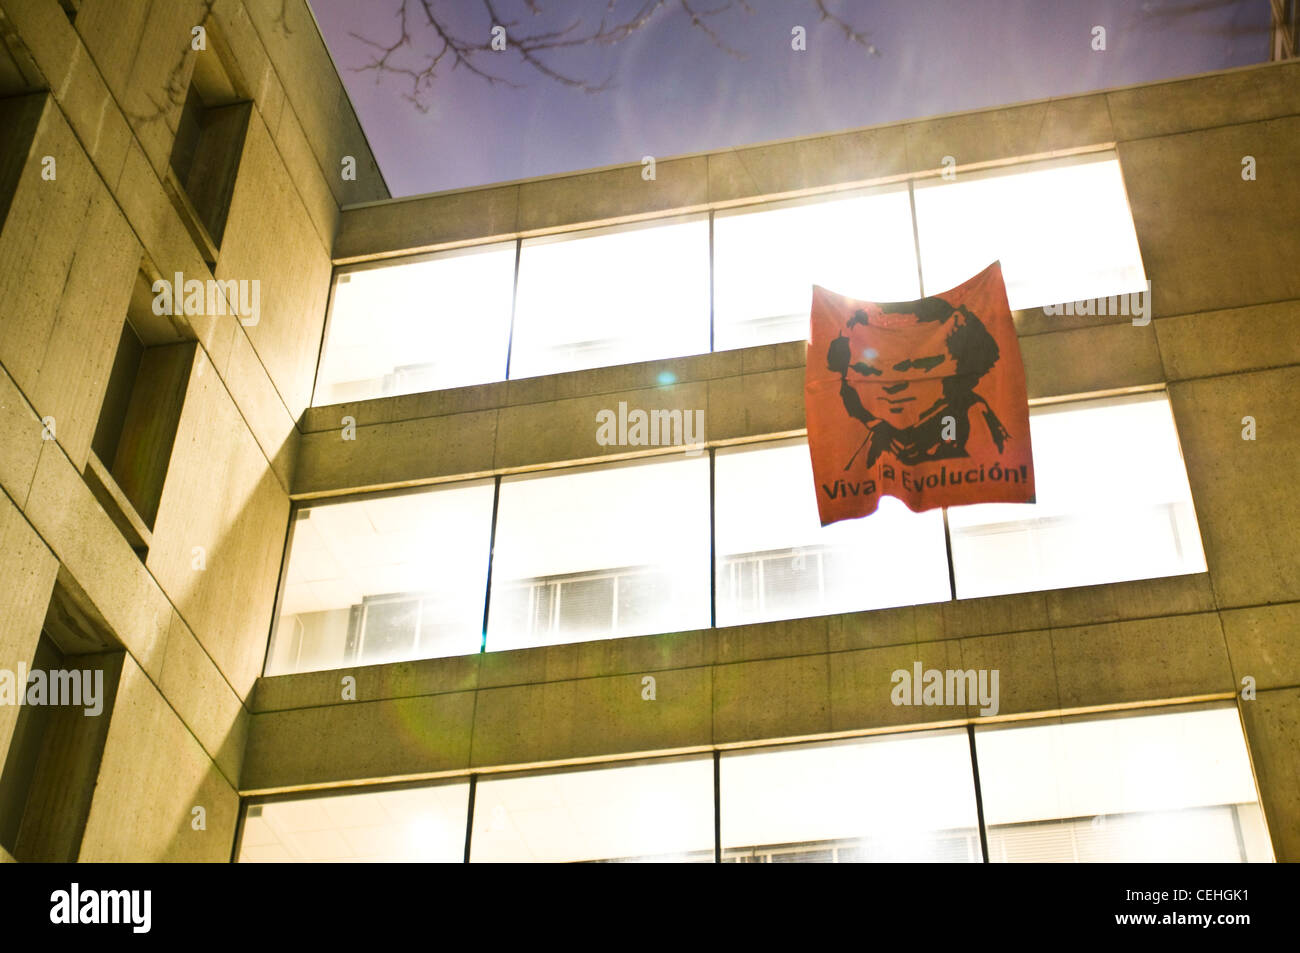 To celebrate Darwin's 200th birthday, MIT hackers put a large red banner with a Che Guevara-style image of Charles Darwin and the words "Viva la Evolucion!" on the skybridge between buildings 18 and 56 on 2/11/09. Stock Photo